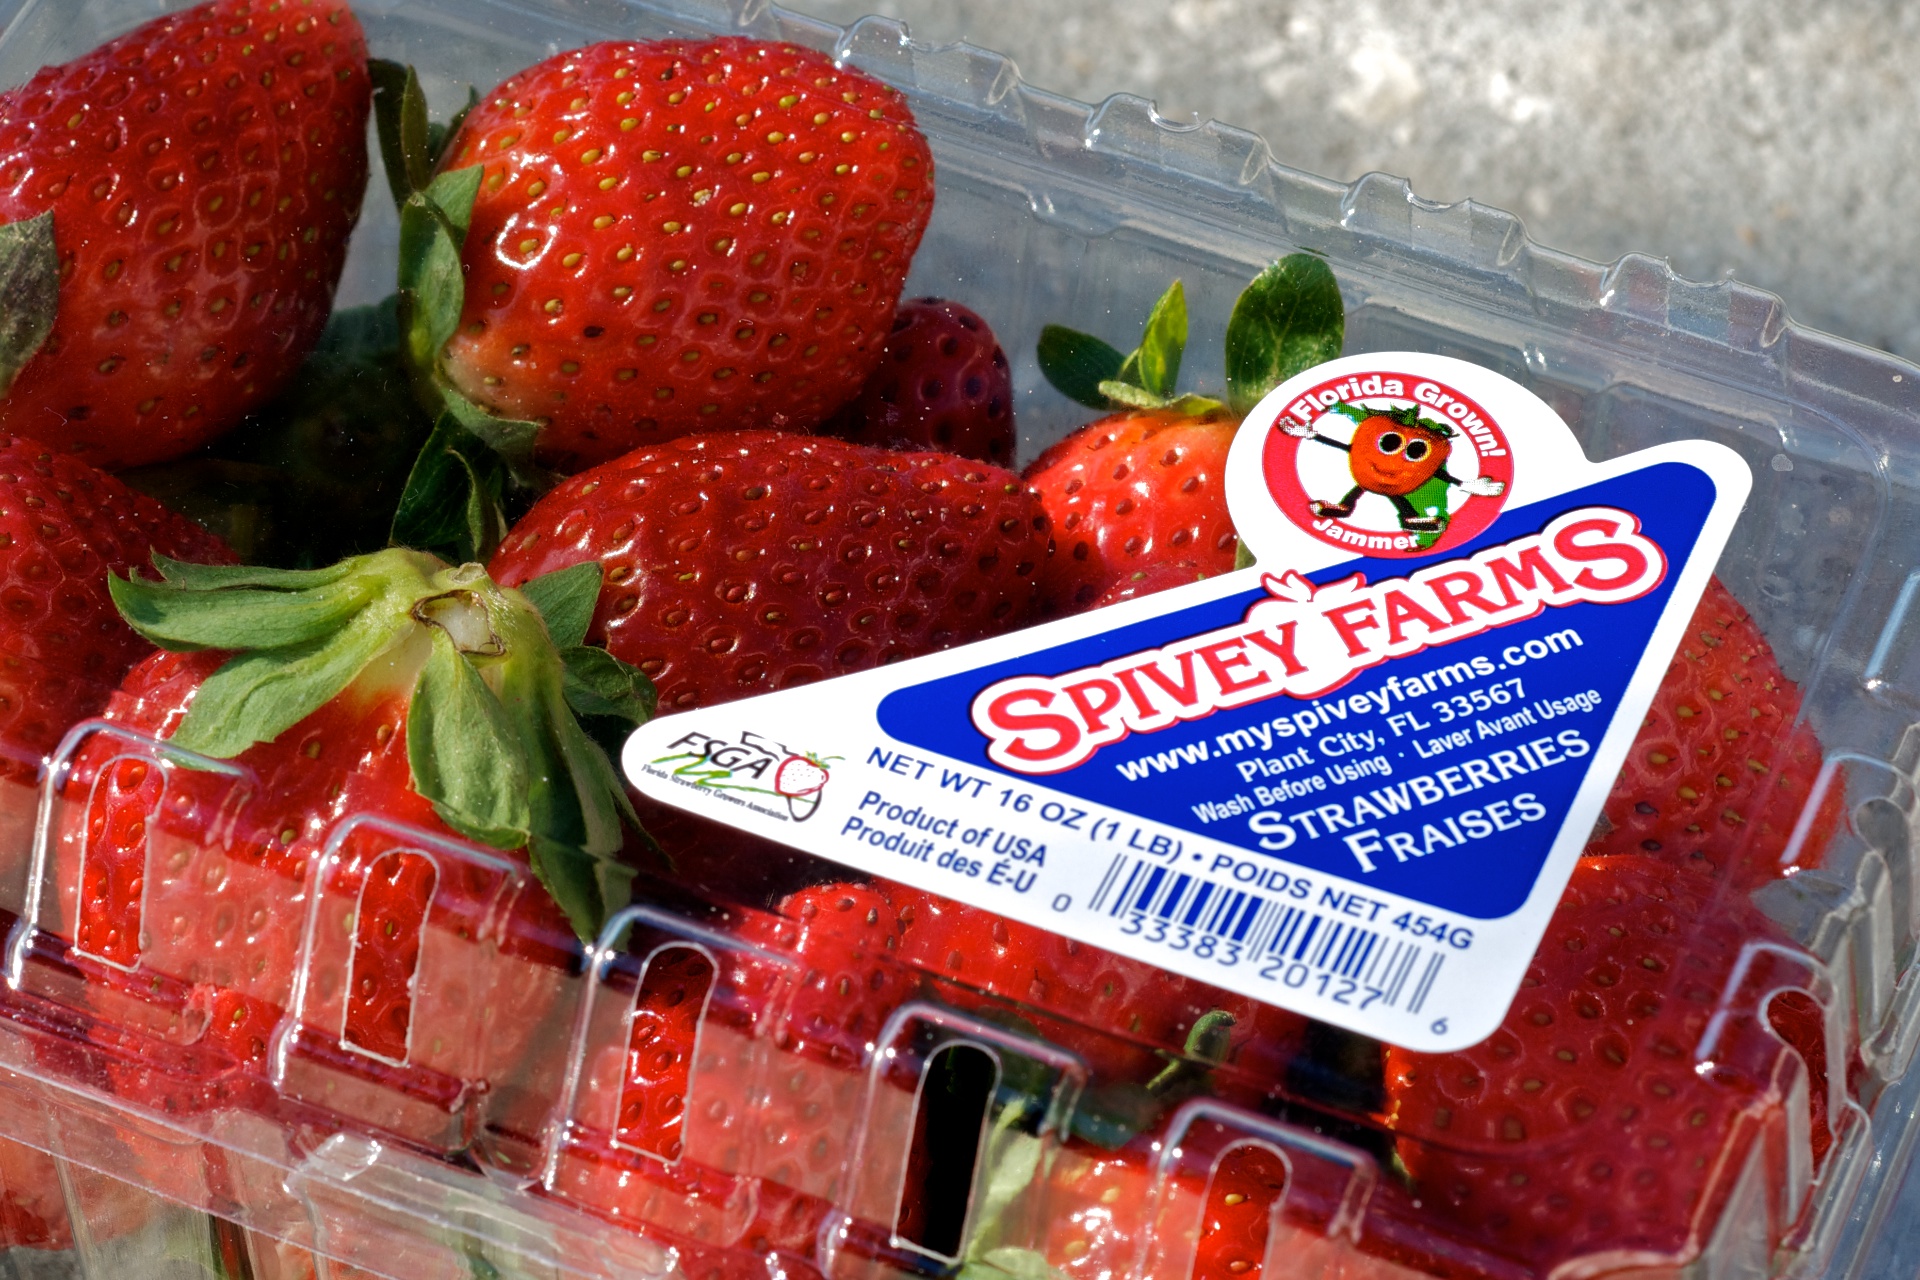 Spivey Farms Strawberries Featuring Jammer